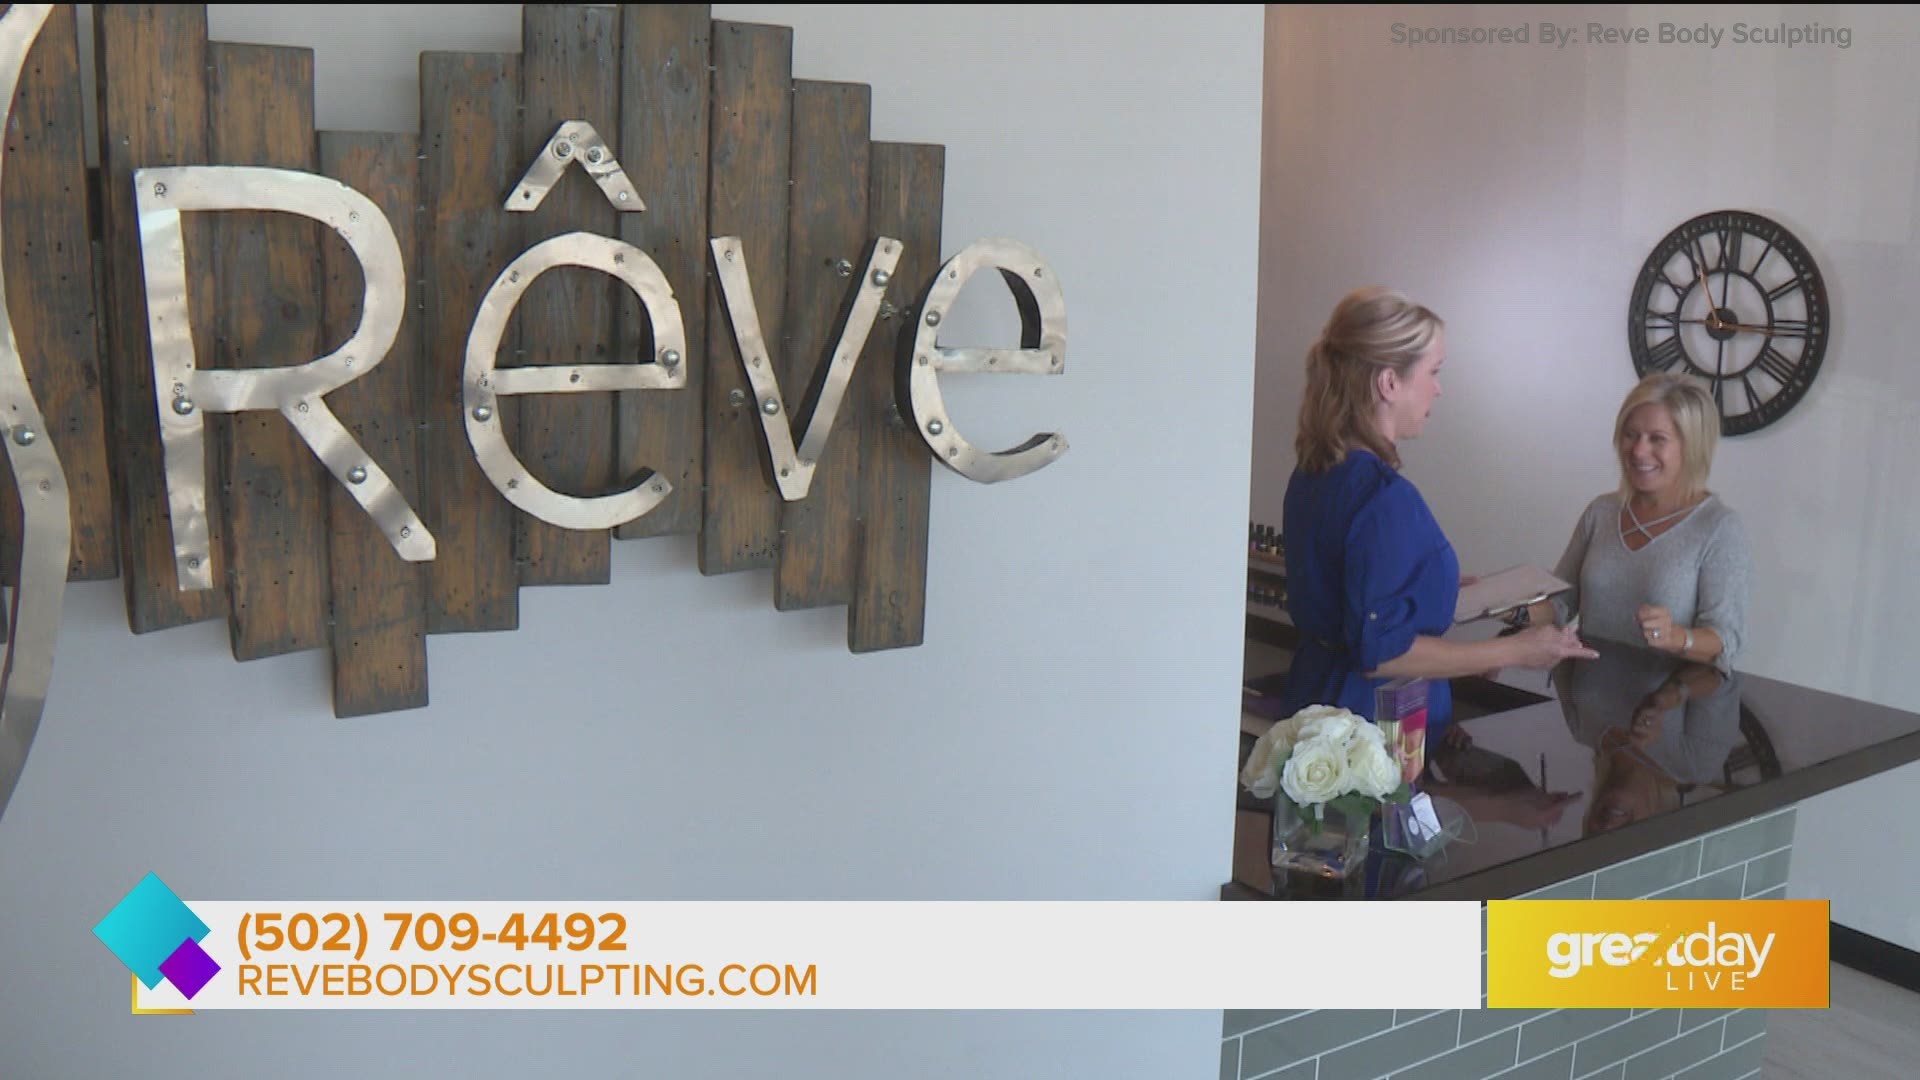 Reve Body Sculpting is located at 12238 Shelbyville Rd in Louisville, KY. For more information, go to ReveBodySculpting.com or call 502-709-4492.